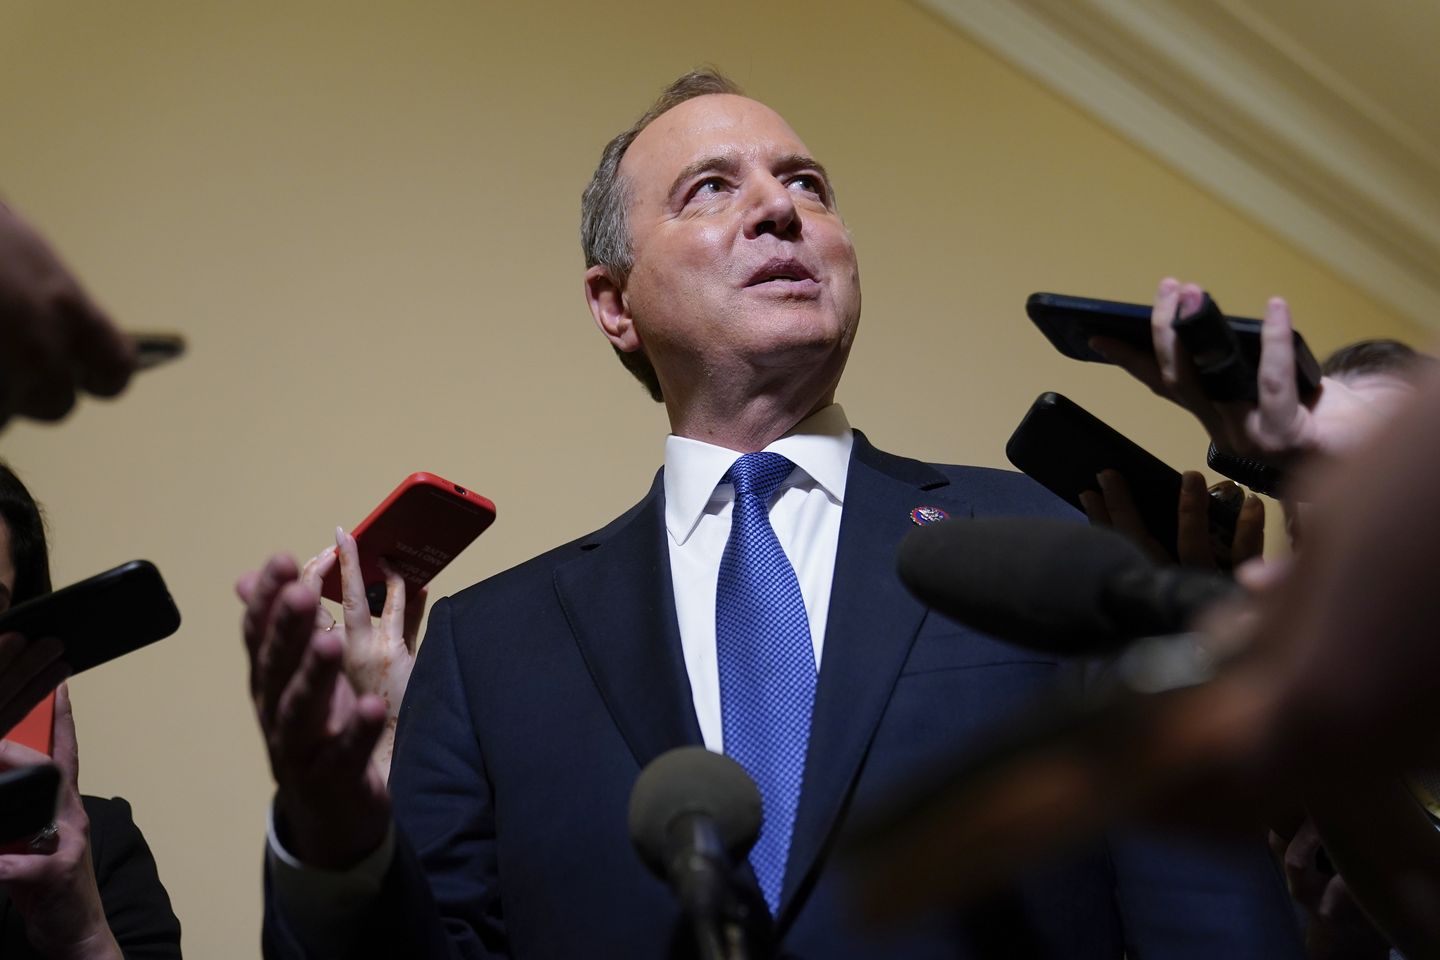 Adam Schiff wants a Pentagon rule that would block Congress' oversight of some military operations